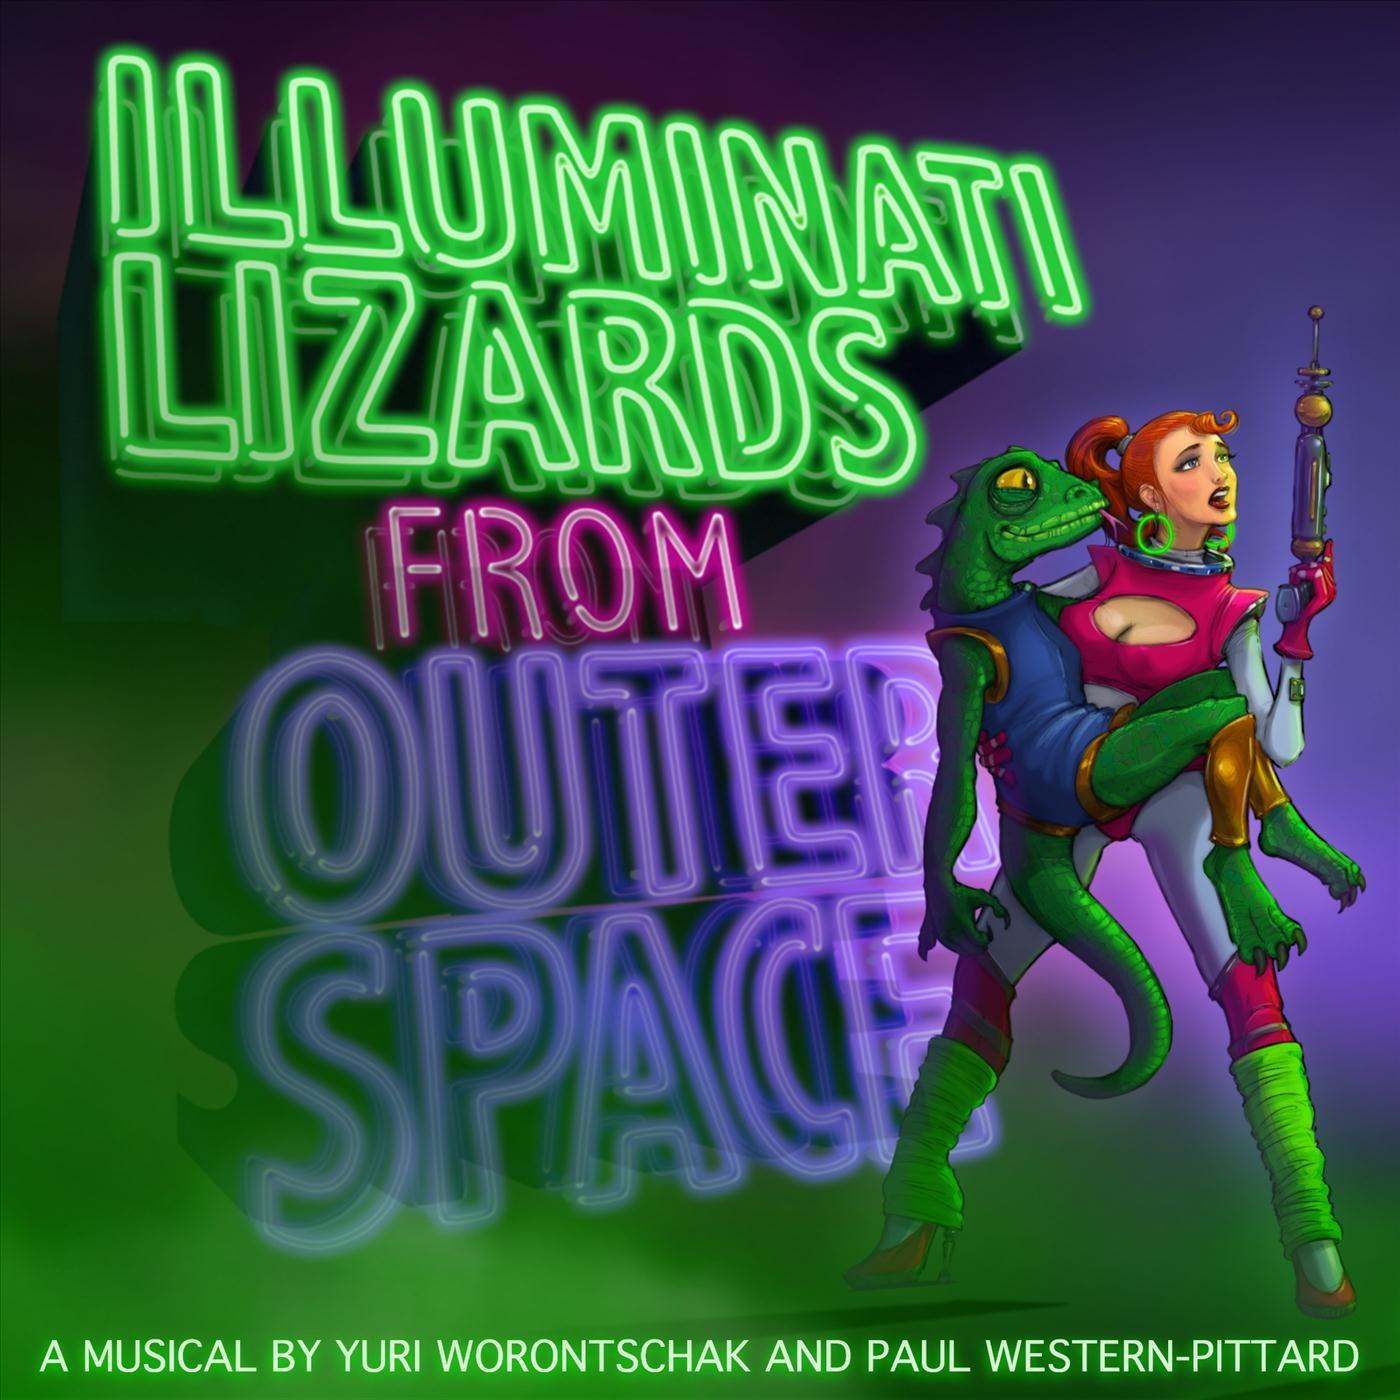 Illuminati Lizards from Outer Space